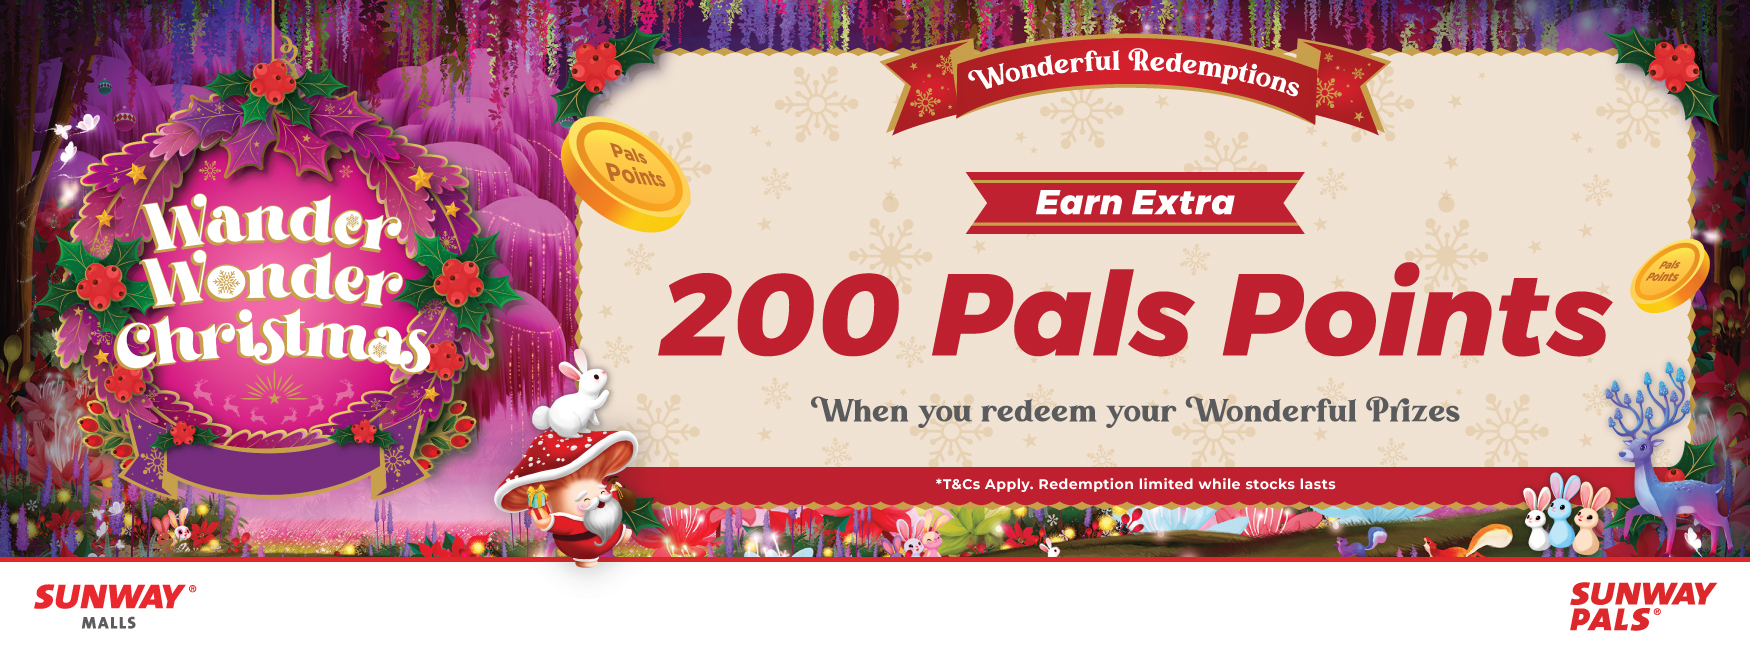 CHRISTMAS GIVEAWAYS - SUNWAY PALS